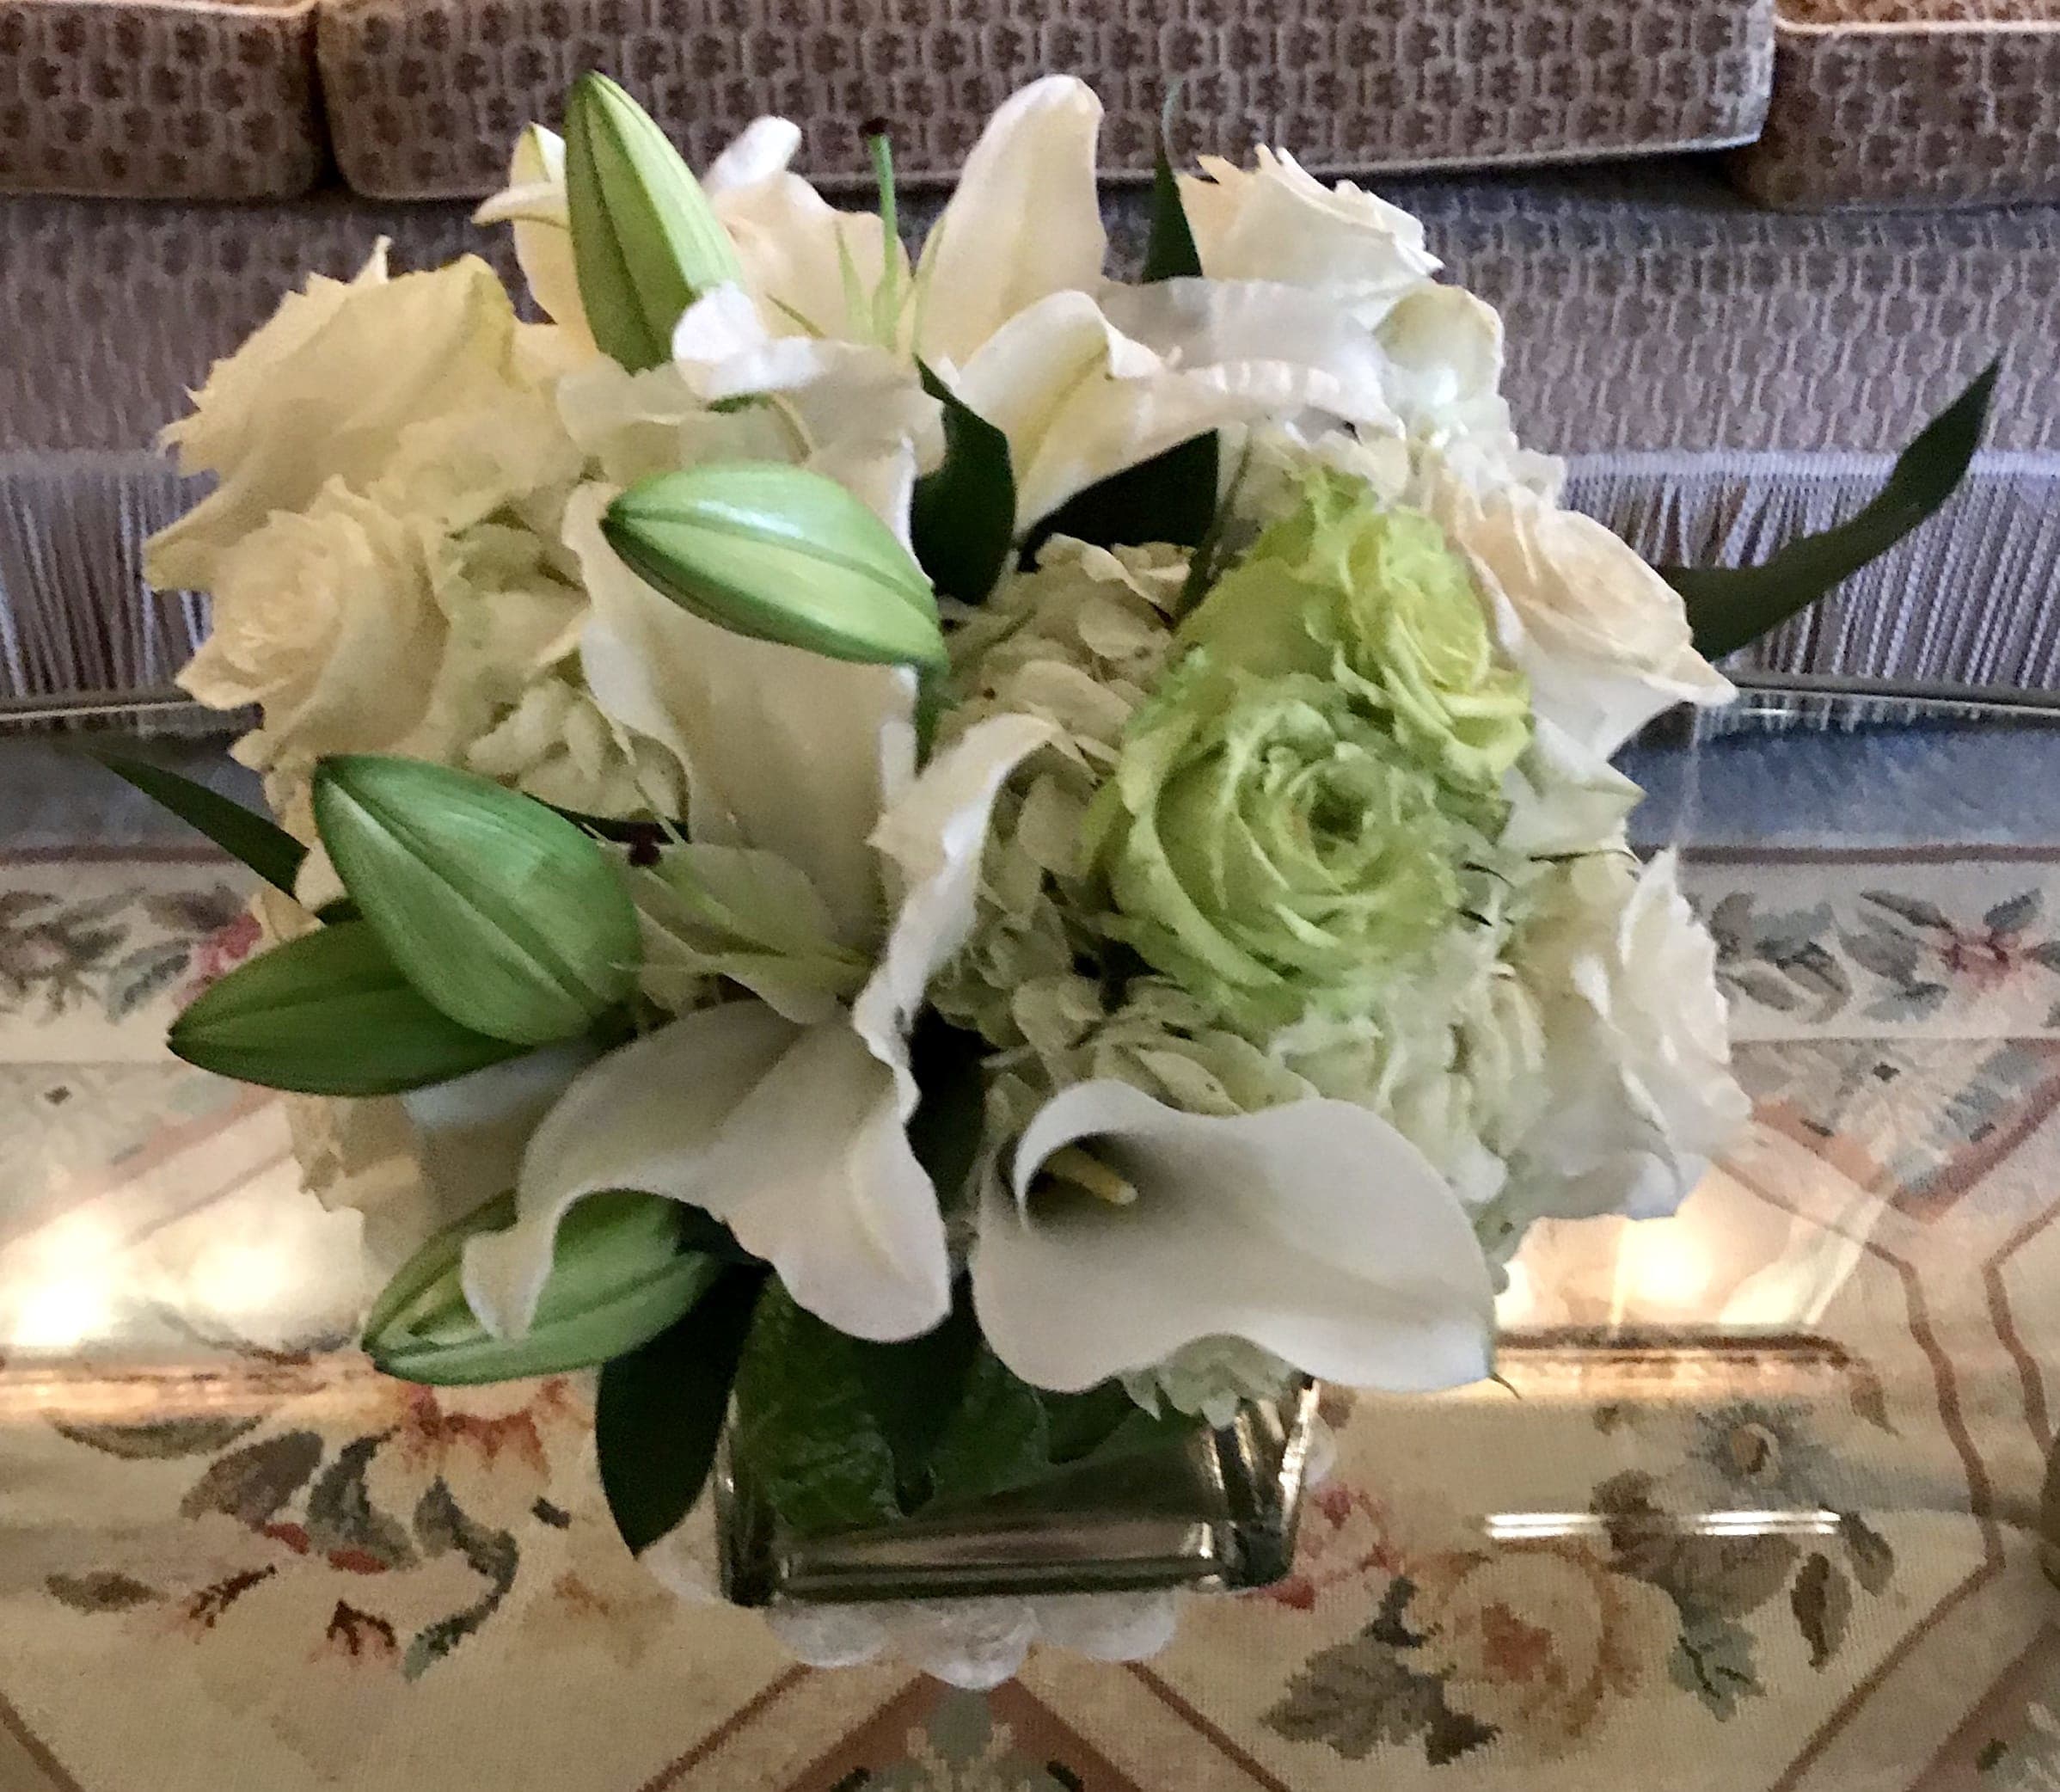 Custom arrangement of white hydrangea, white Roses, Casablanca lilies &amp; white calla lilies - Custom arrangement of white hydrangea, white Roses, white Casablanca lilies, white calla lilies &amp; green roses in clear glass cube.